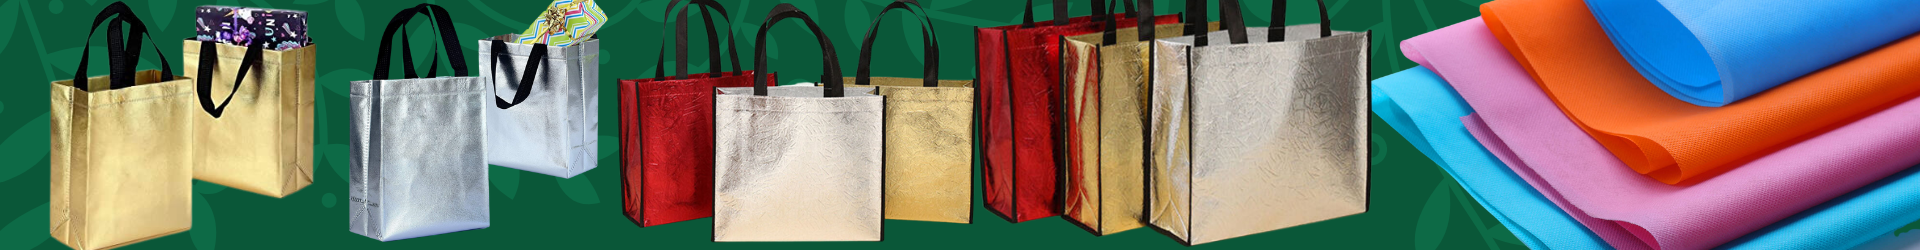 Non Woven Bags Making Machines  Non Woven Bag Making MachinMade In India  Manufacturer from Faridabad